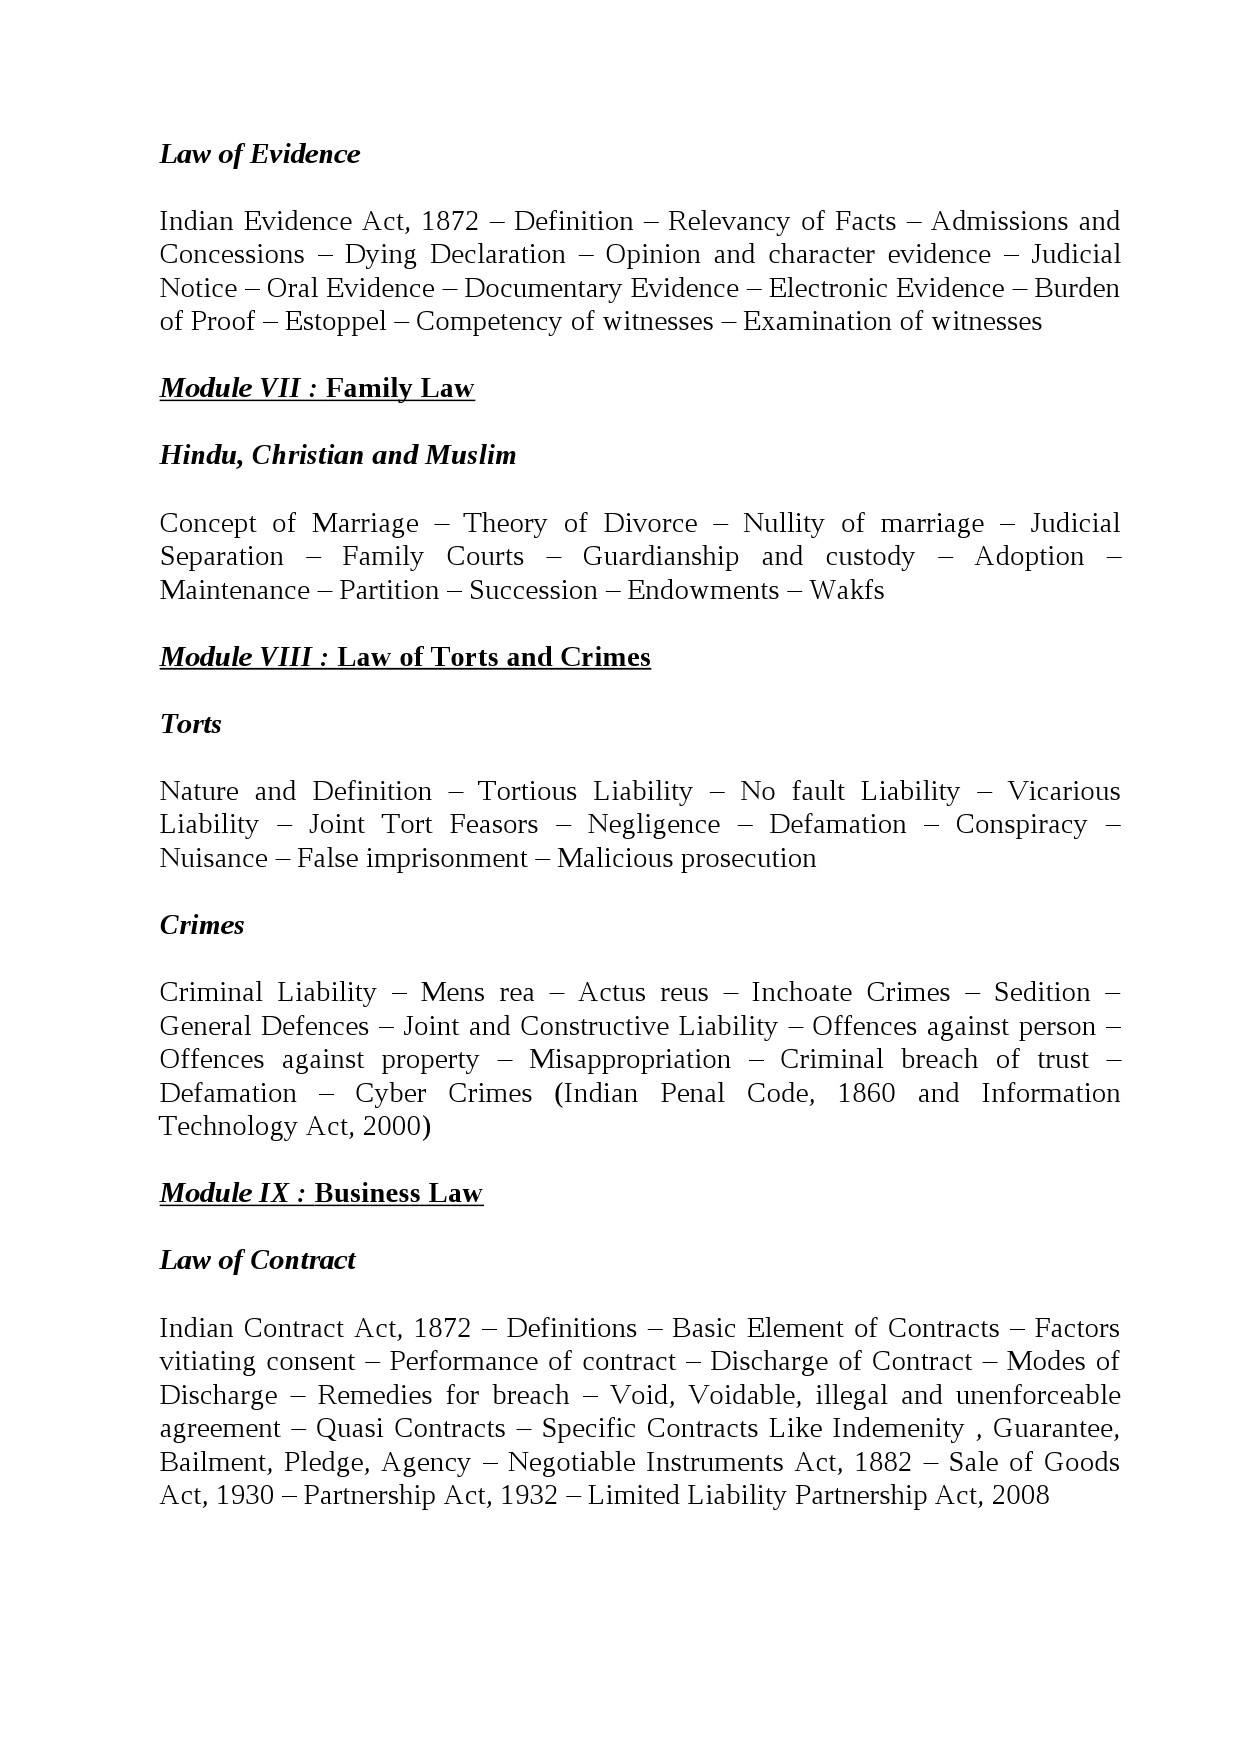 Syllabus for Exams with LLB as Qualification - Notification Image 8